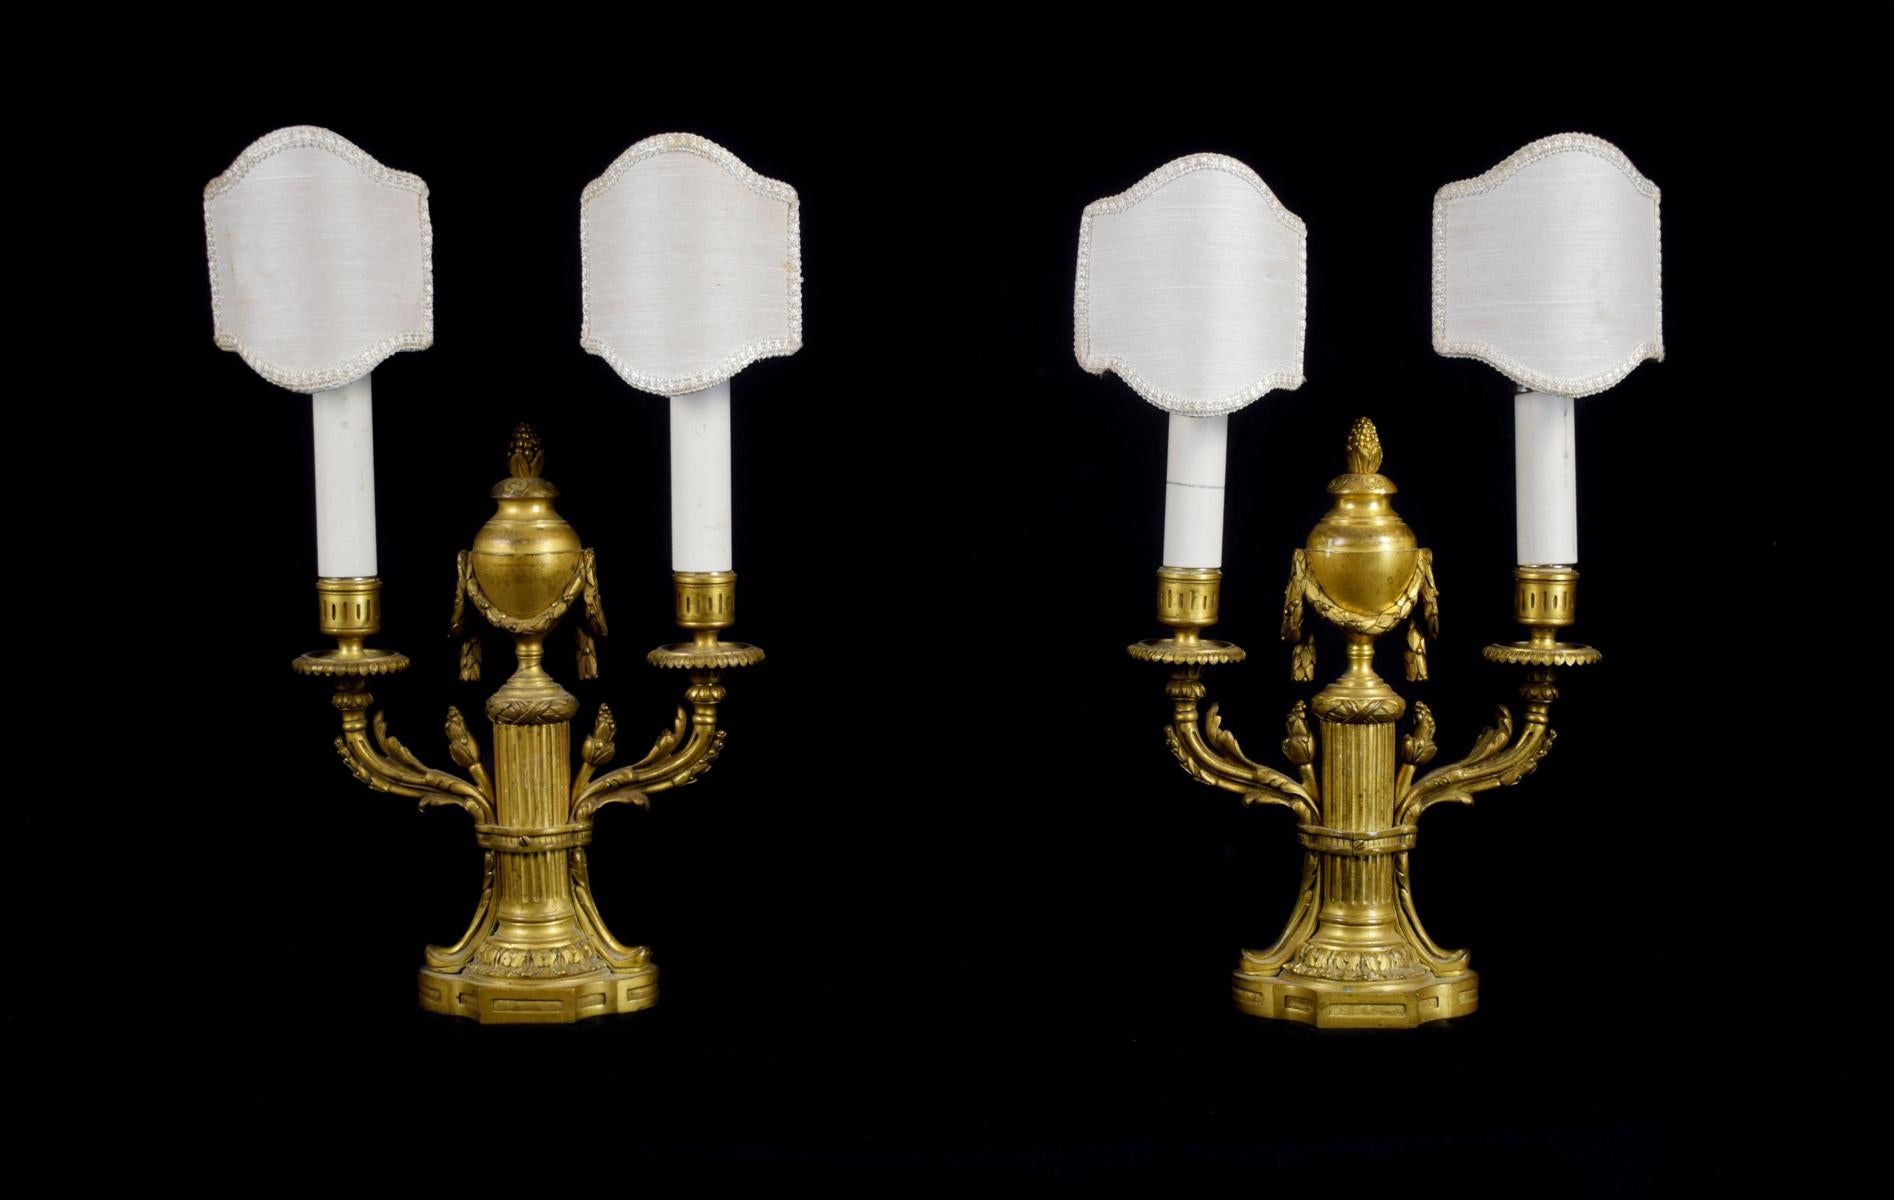 19th century, pair of French Louis XVI two lights gilt bronze candlesticks
sizes: overall height cm 39,5 x height bronze 29 x W 20 x D 9 cm

The fine pair of candlesticks was made in France in the 19th Century in finely chiselled and gilded bronze,